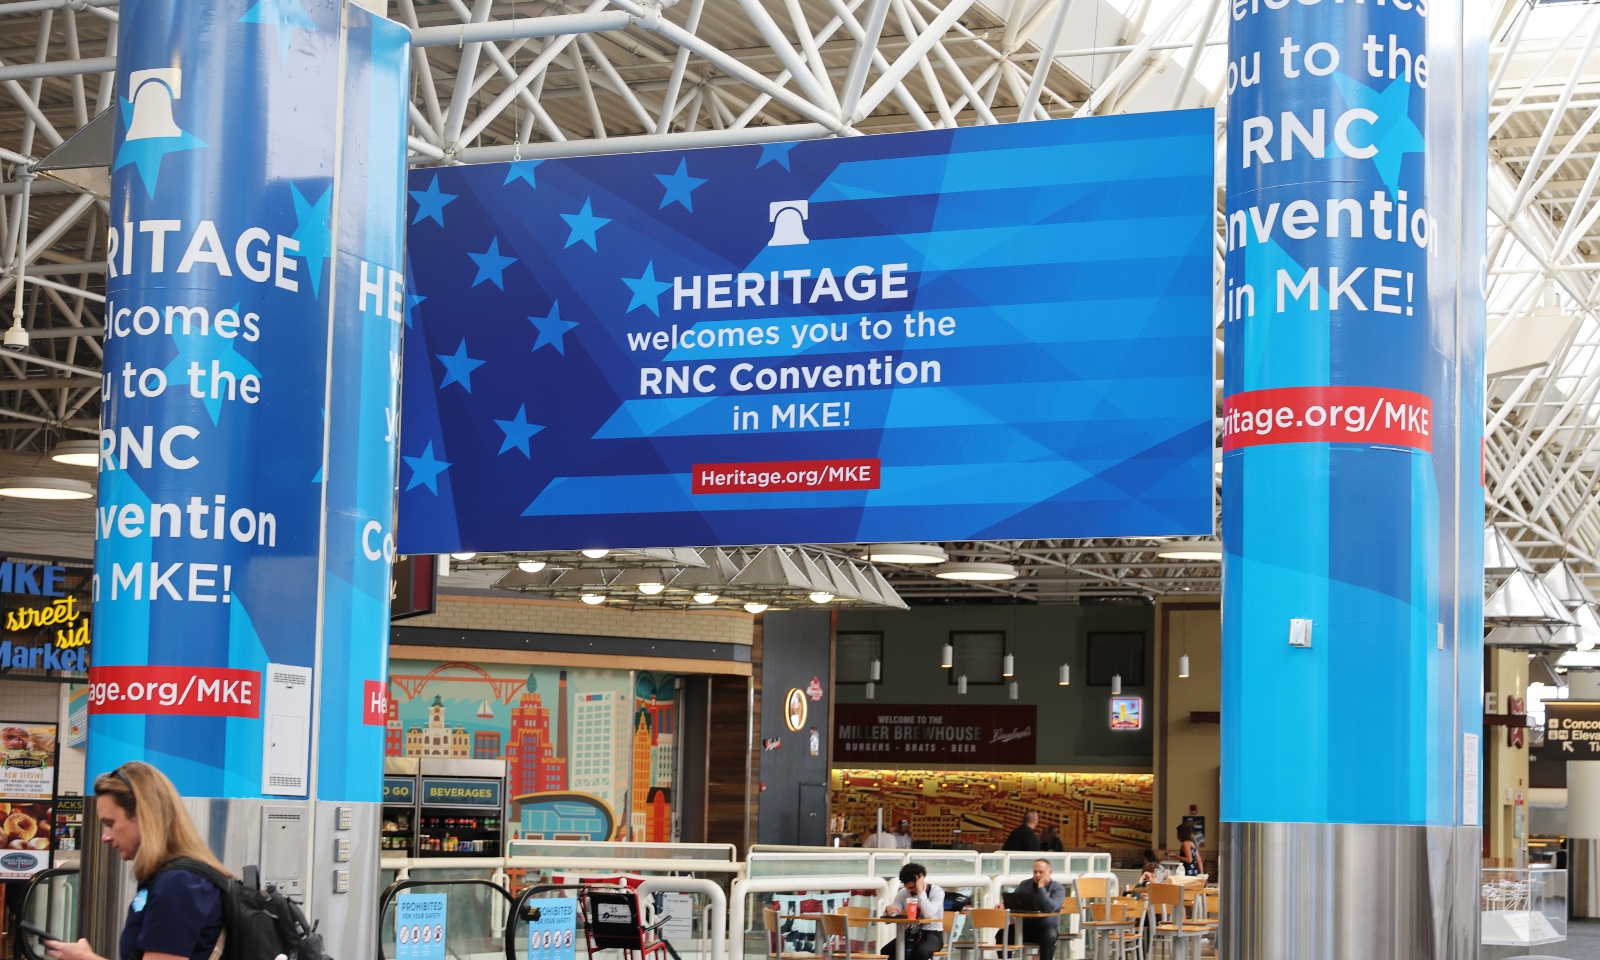 A large, blue sign with the words 'Heritage welcomes you to the RNC Convention in MKE' on it hangs between two pillars